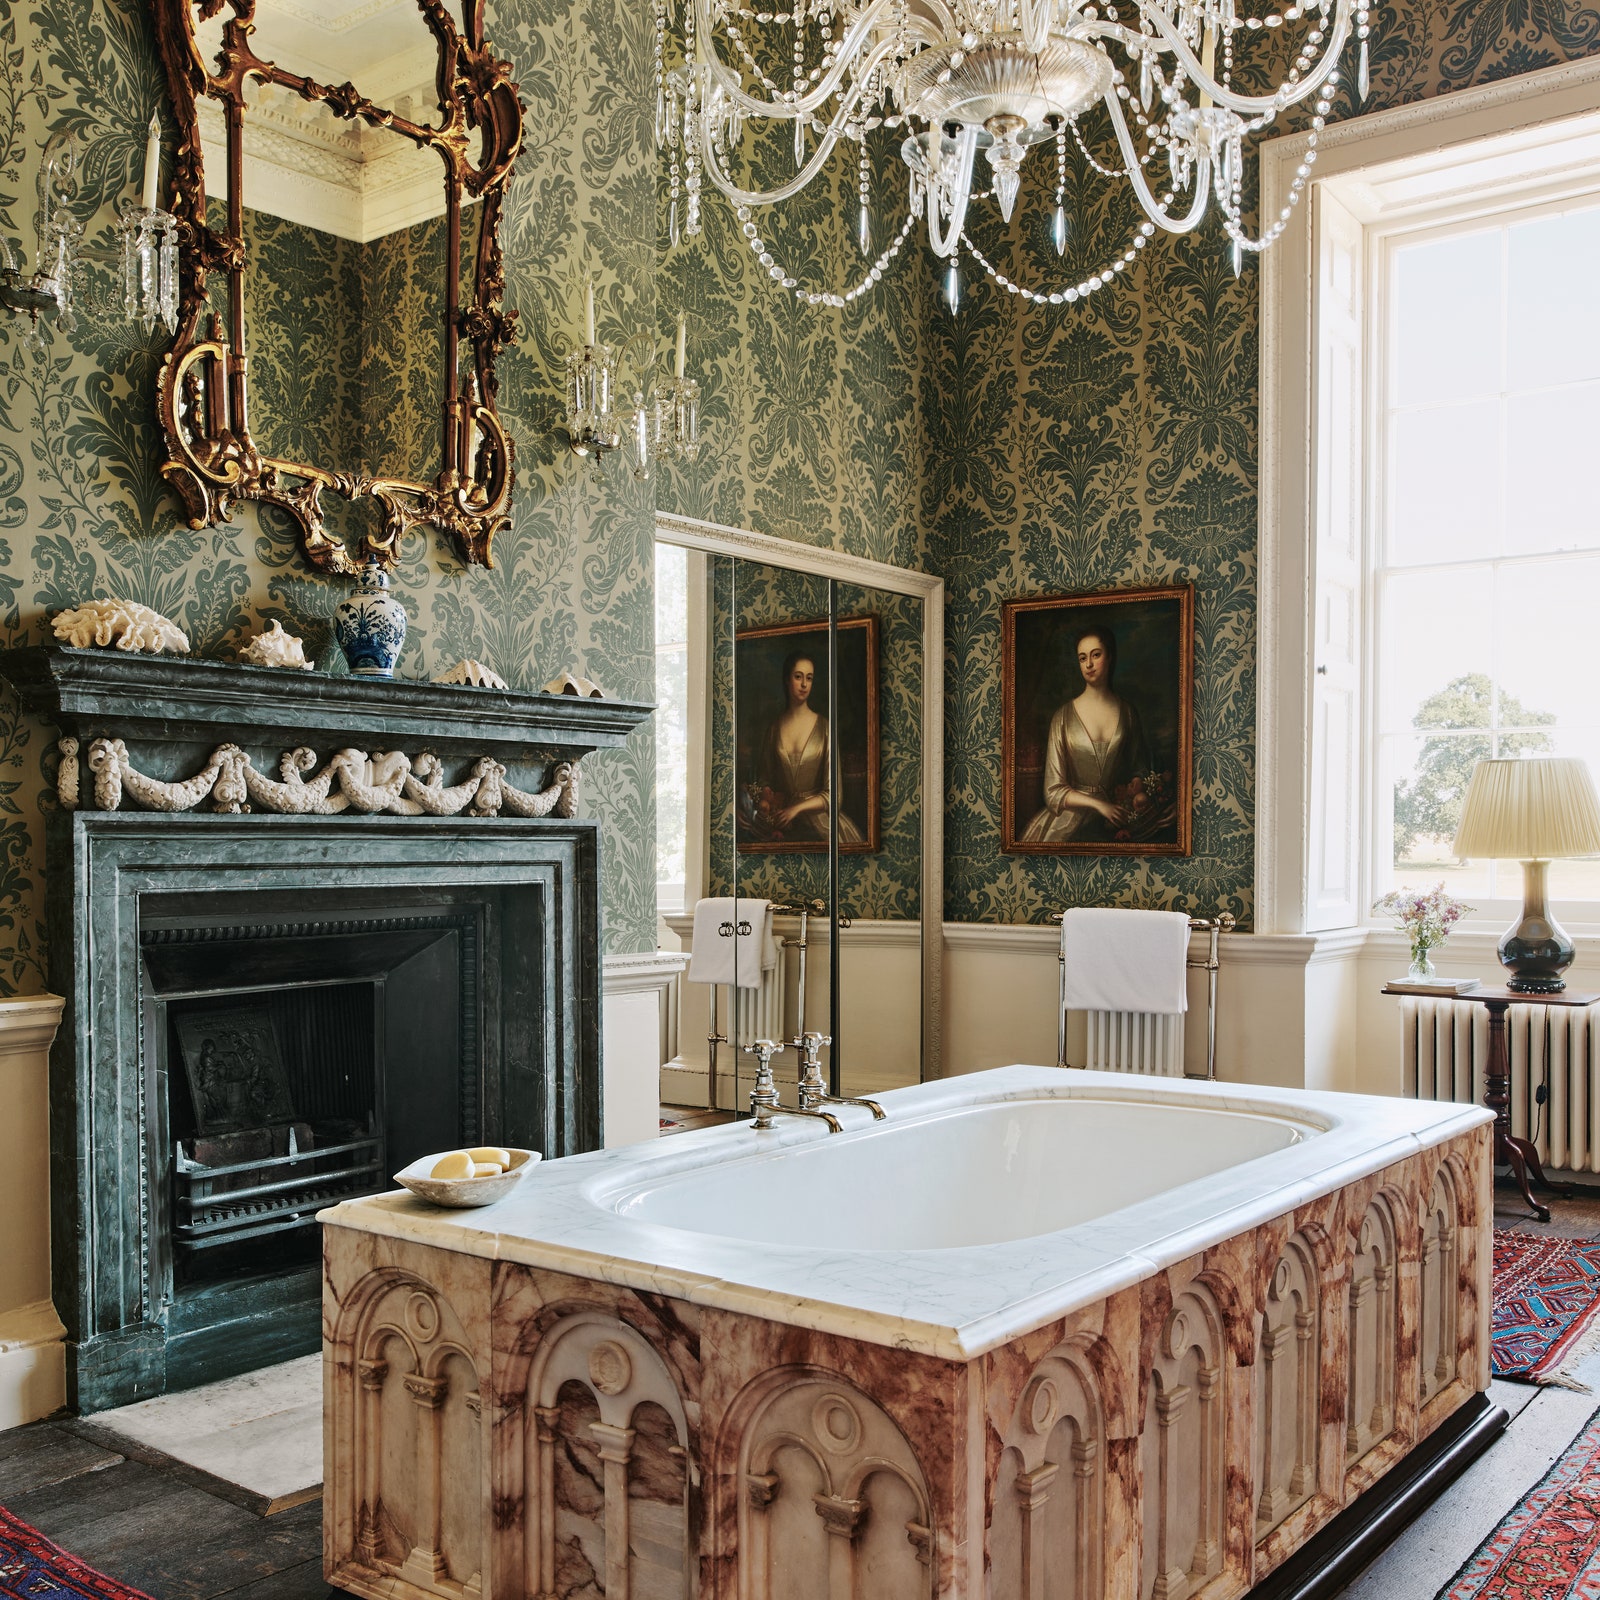 10 more of the most beautiful rooms in Britain and what we can learn from their clever design